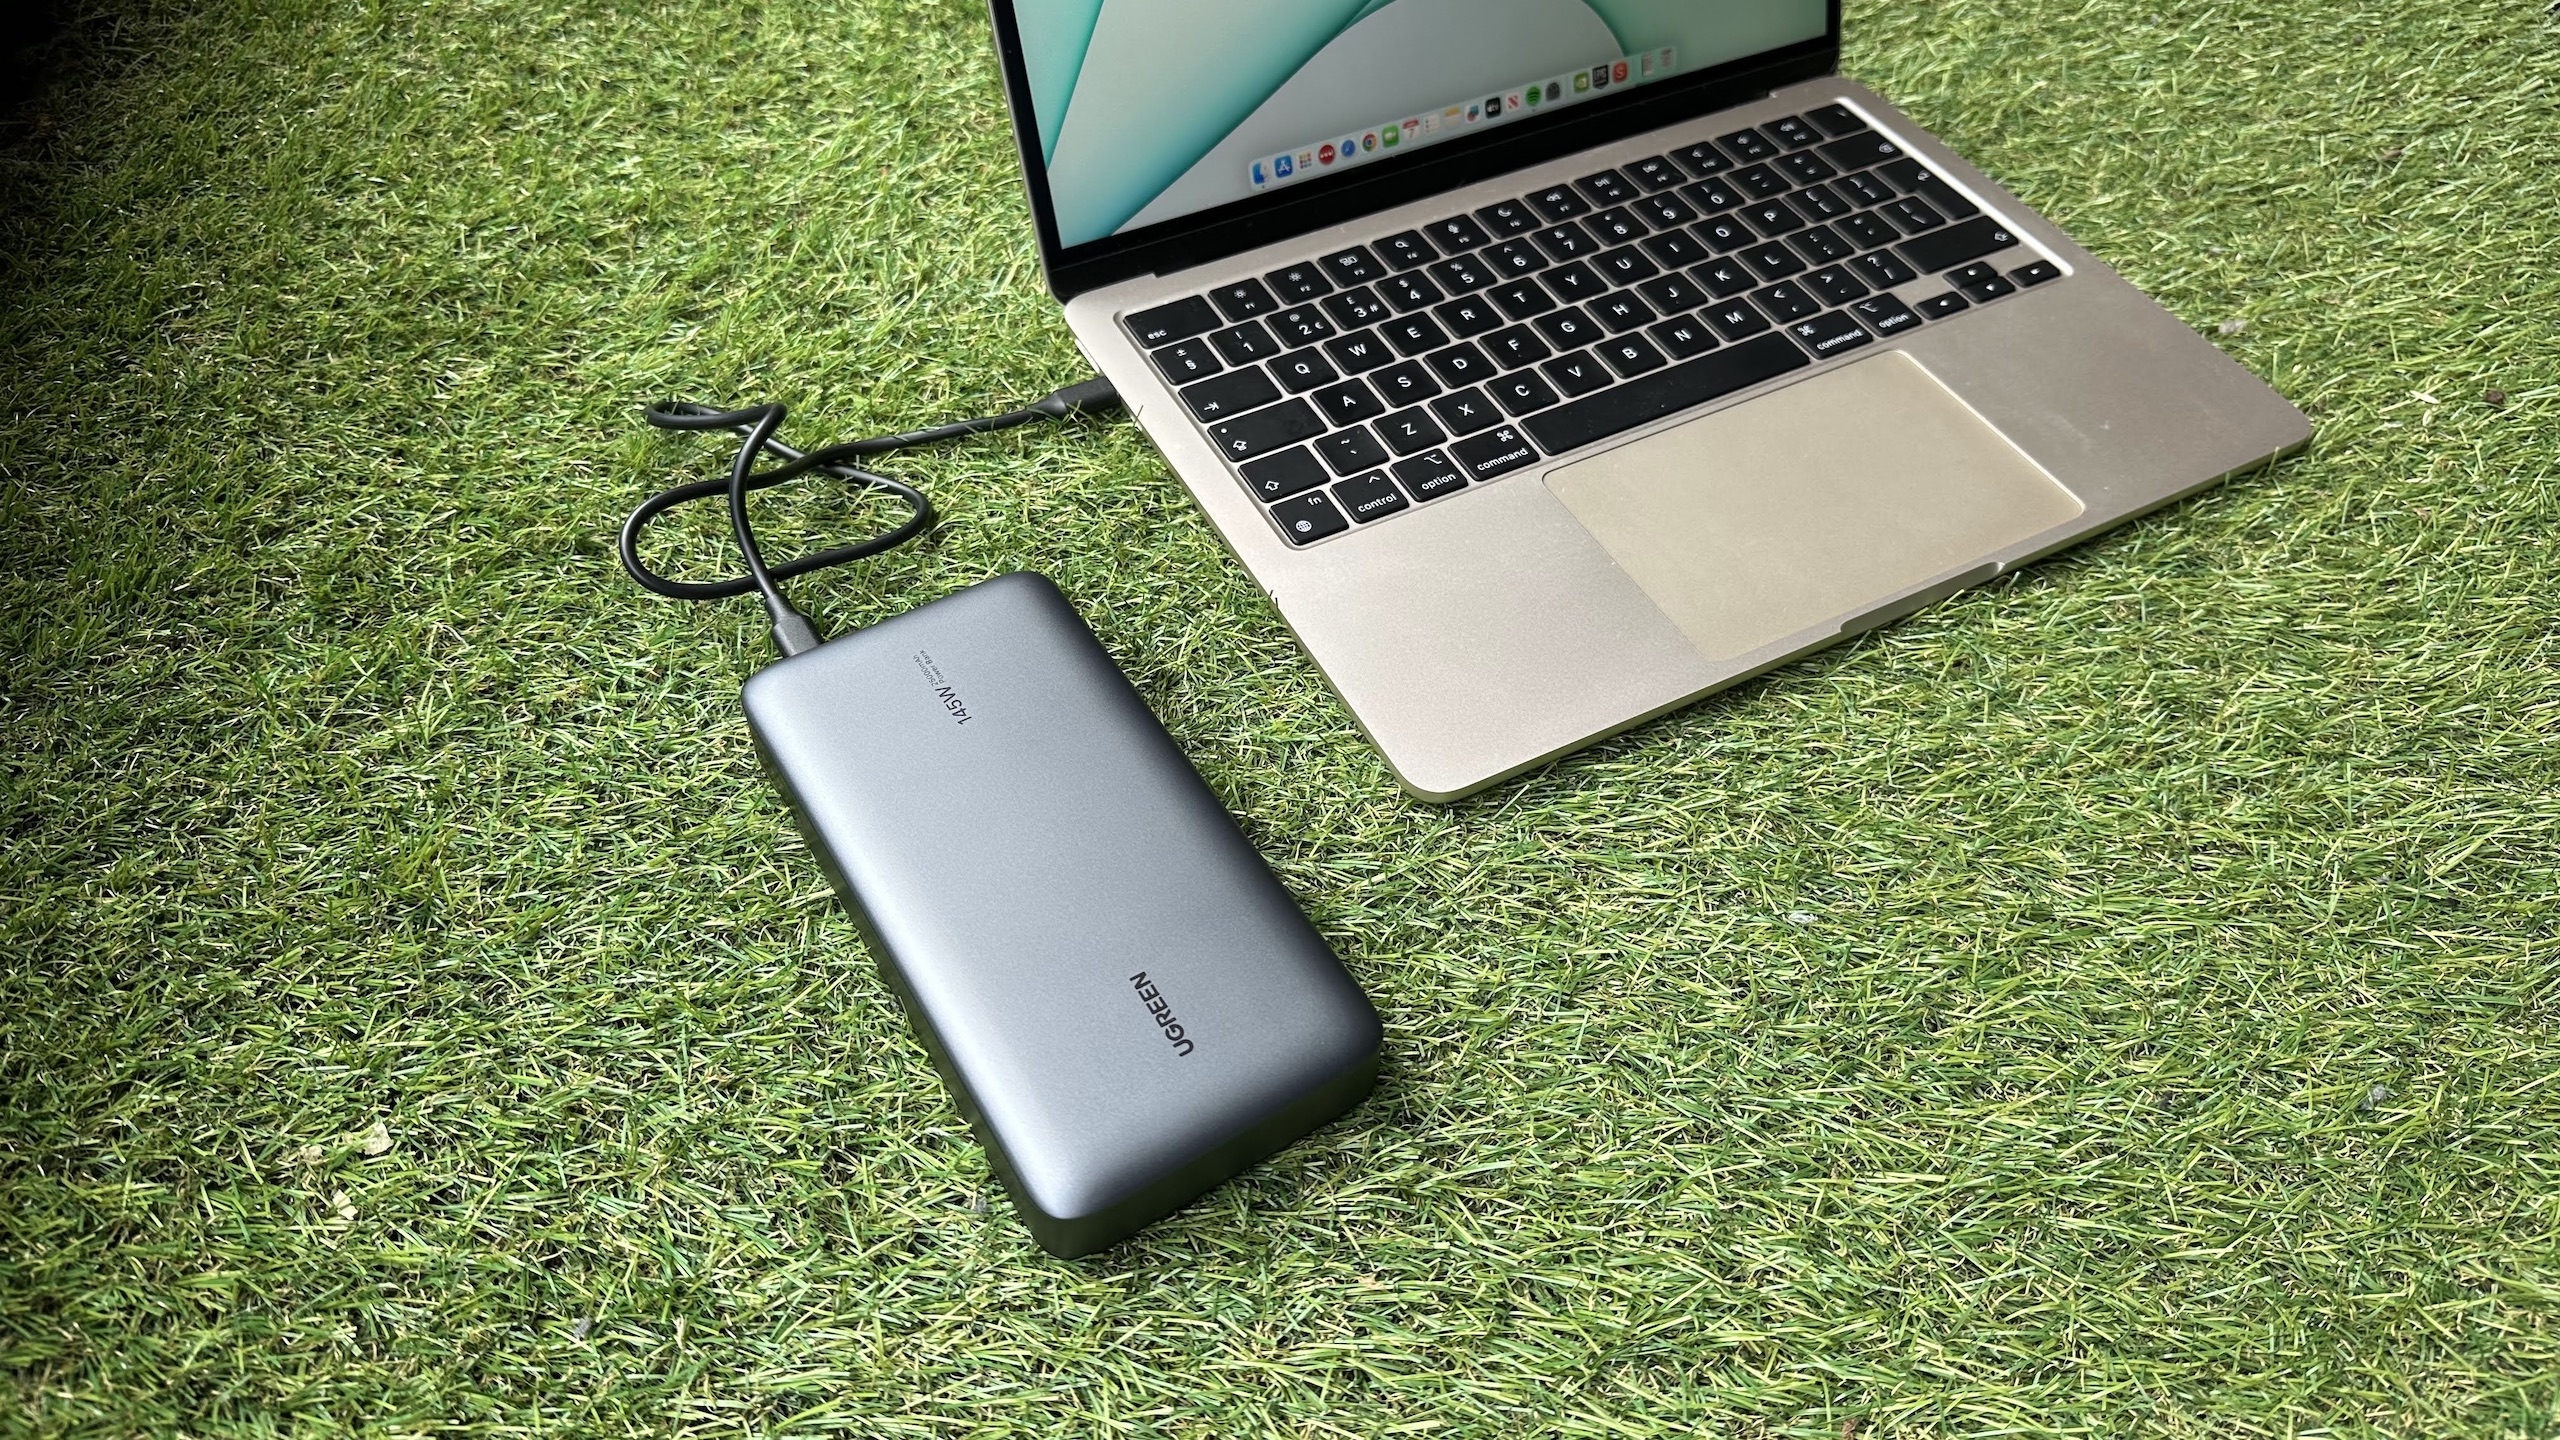 UGreen 145W 25000mAh power bank review: The last portable charger